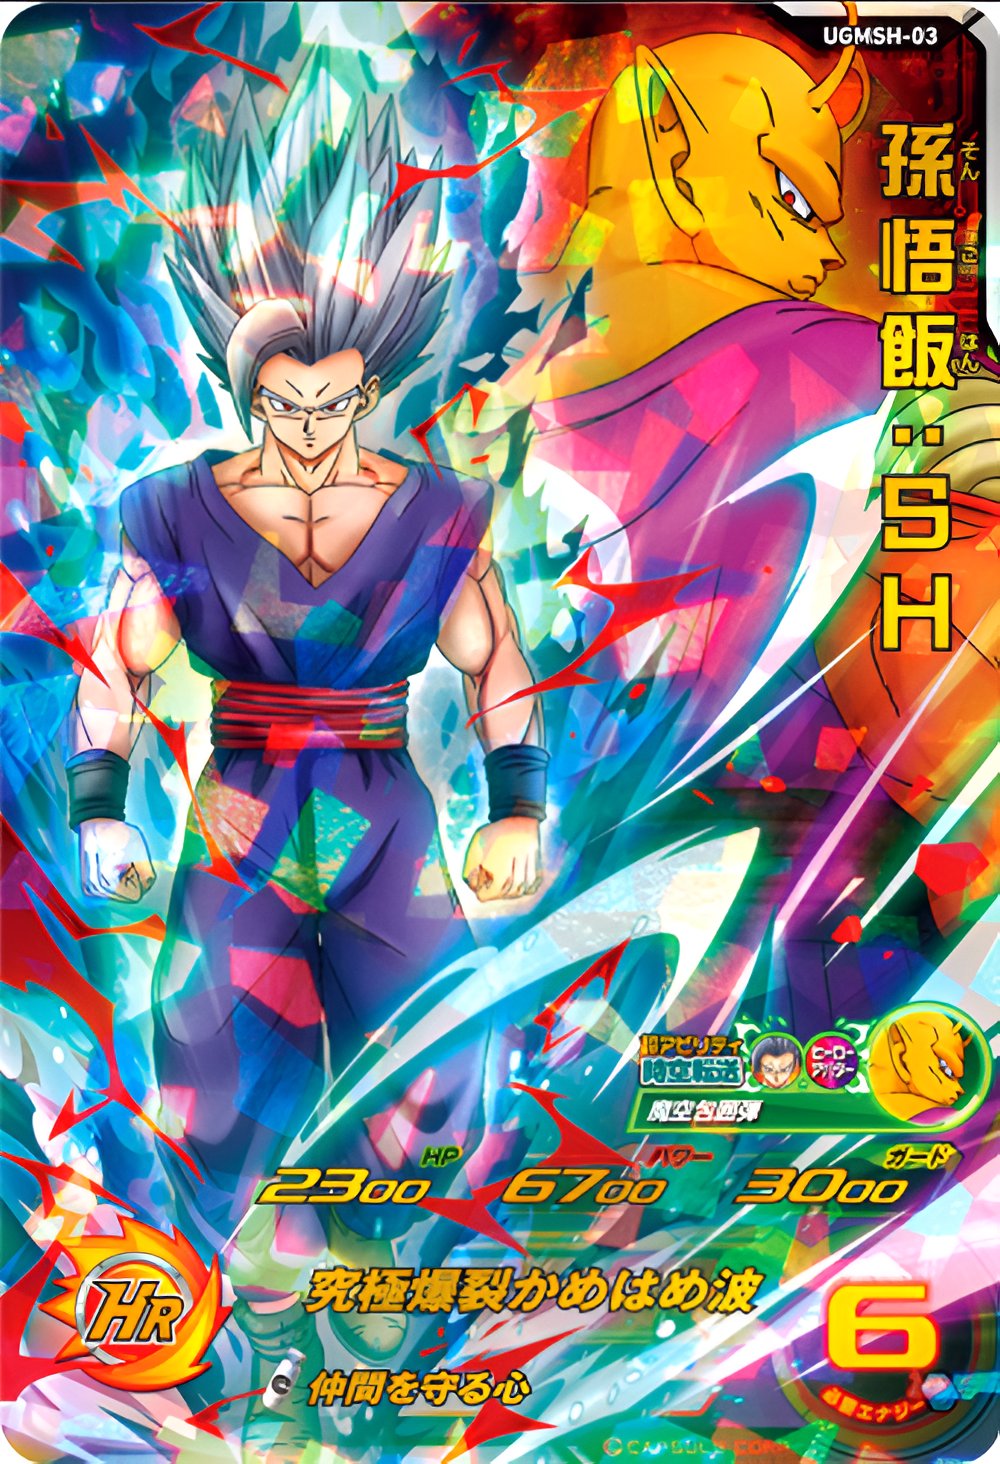 SUPER DRAGON BALL HEROES ULTIMATE CARD PACK DRAGON BALL SUPER SUPER HERO  UGMSH-03 Son Gohan : SH  Promotional card given at the entrance of the movie DRAGON BALL SUPER SUPER HERO in Japanese theaters from July 23 2022.  Product for collectors who want to keep sealed pack.